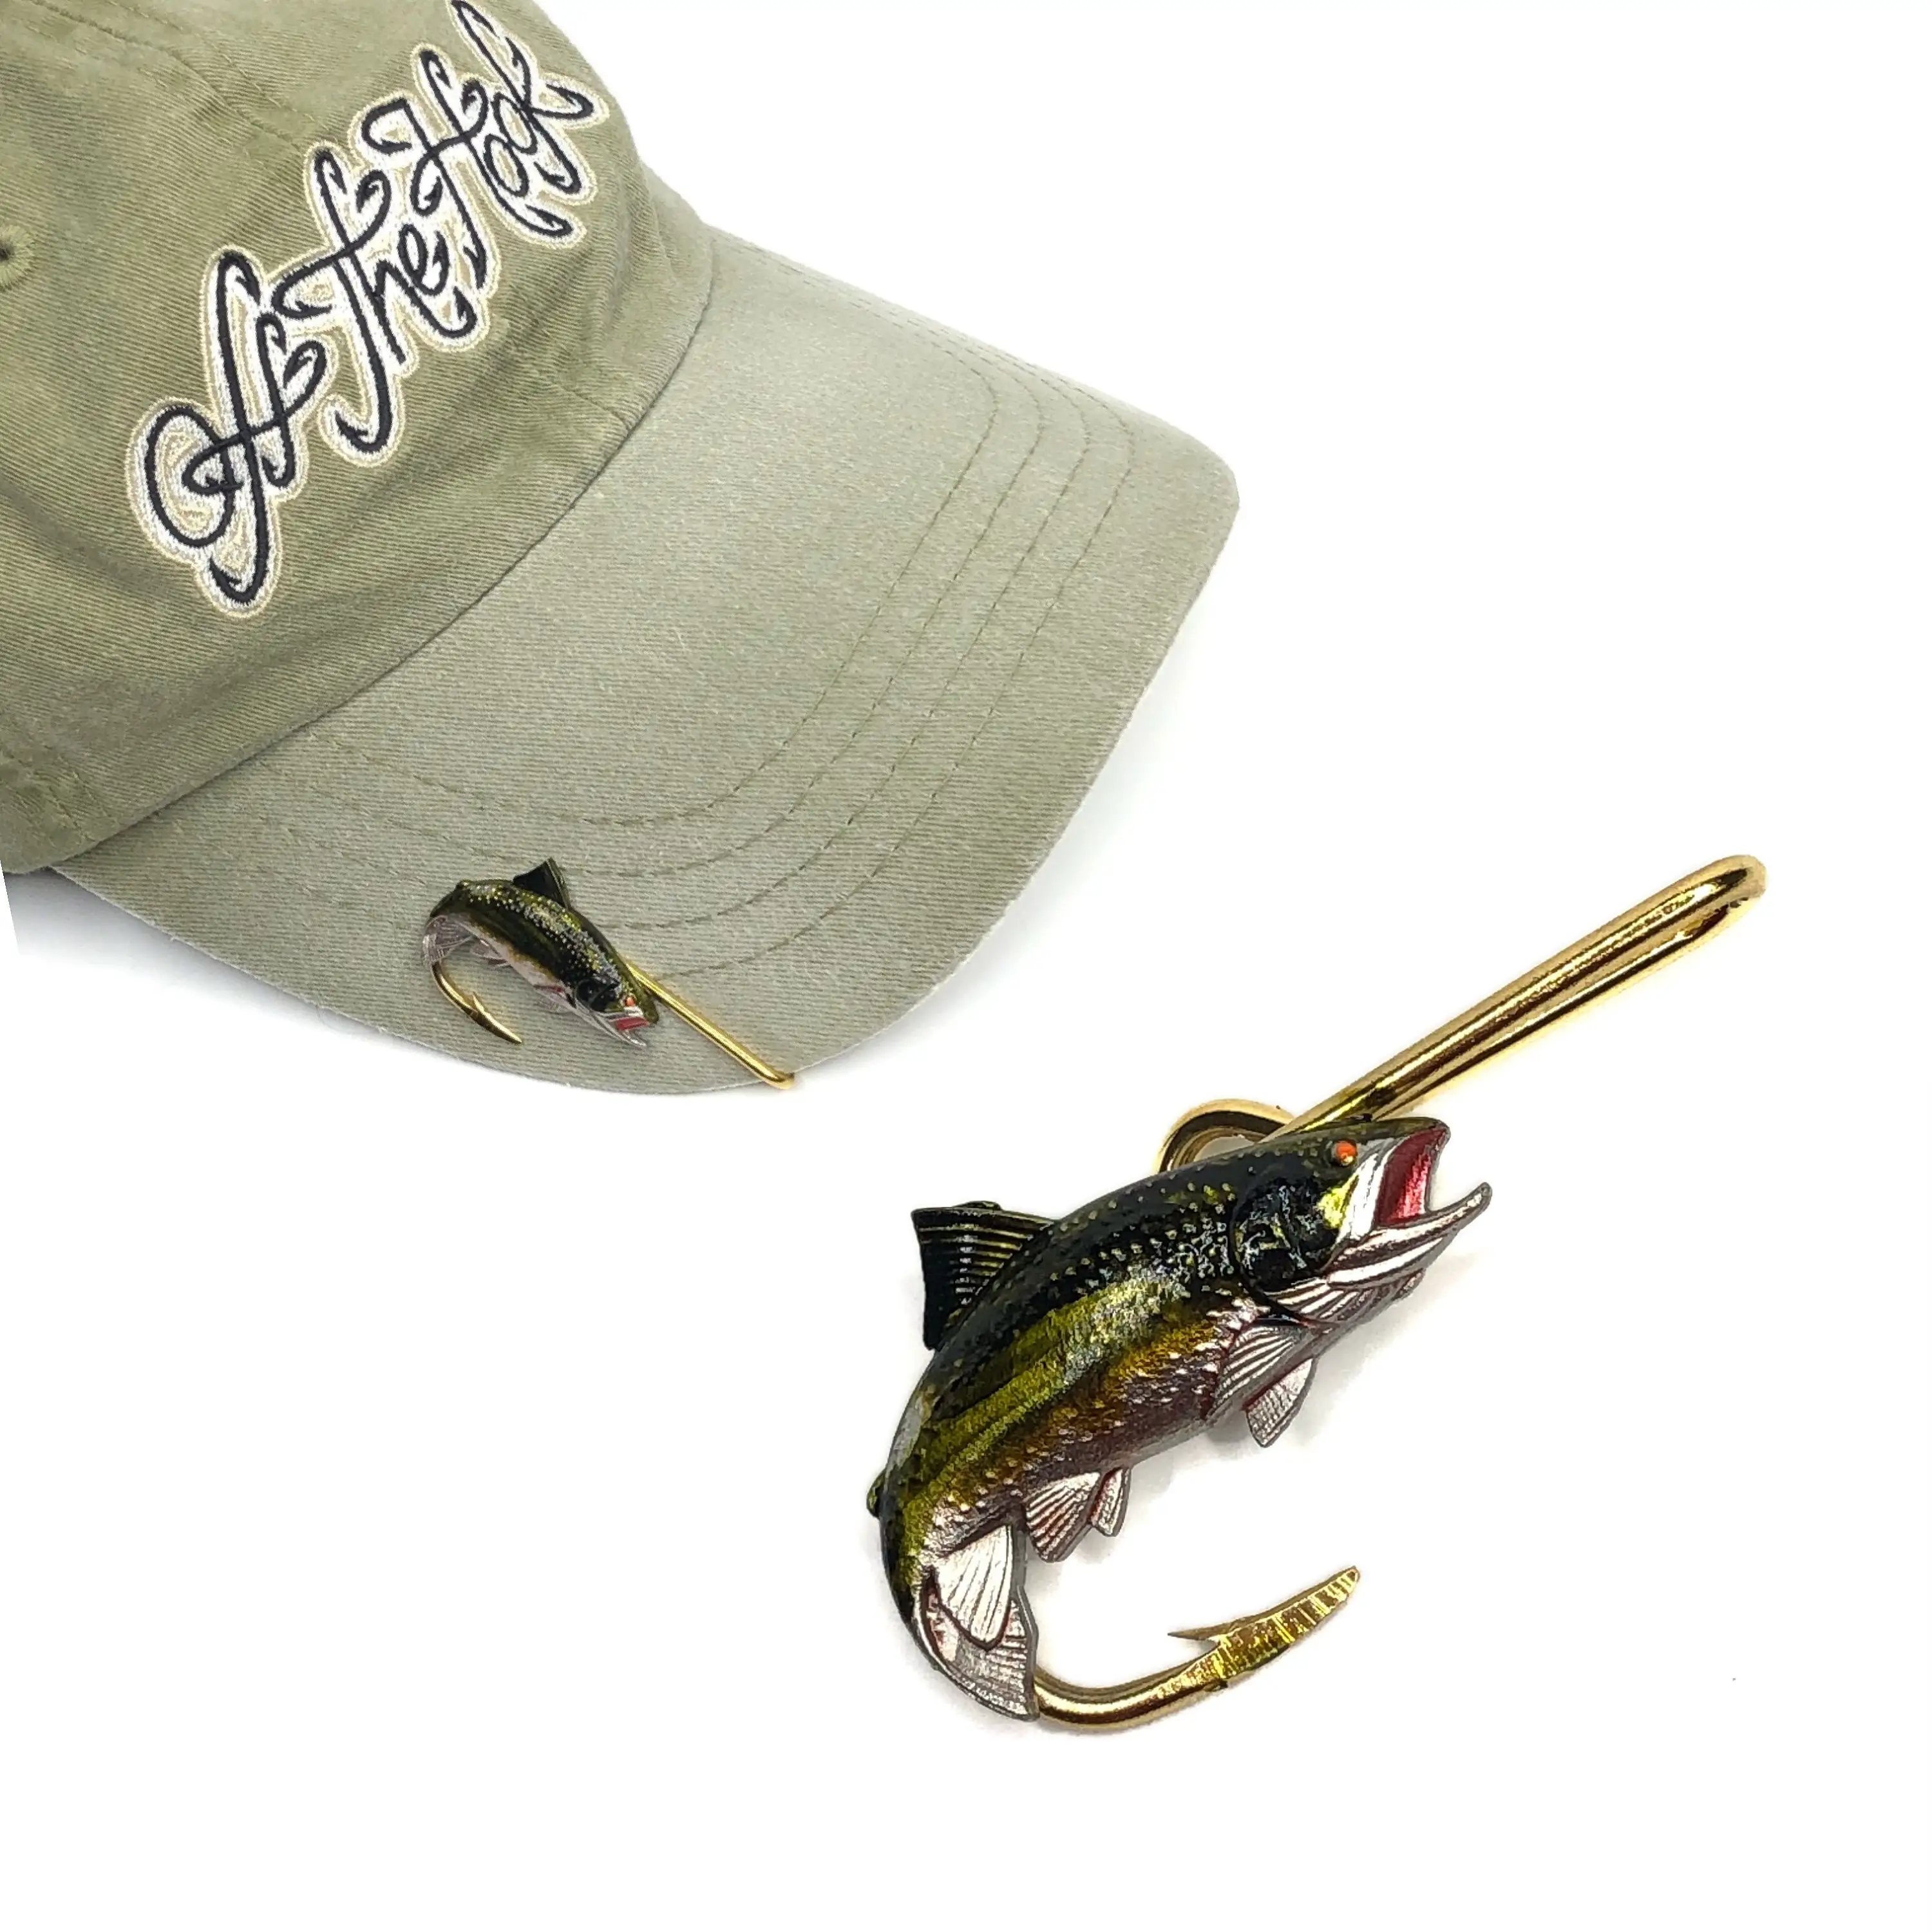 Gold finish fish hook hat cap bill tie clasp money anglers clip fishing AC-1 